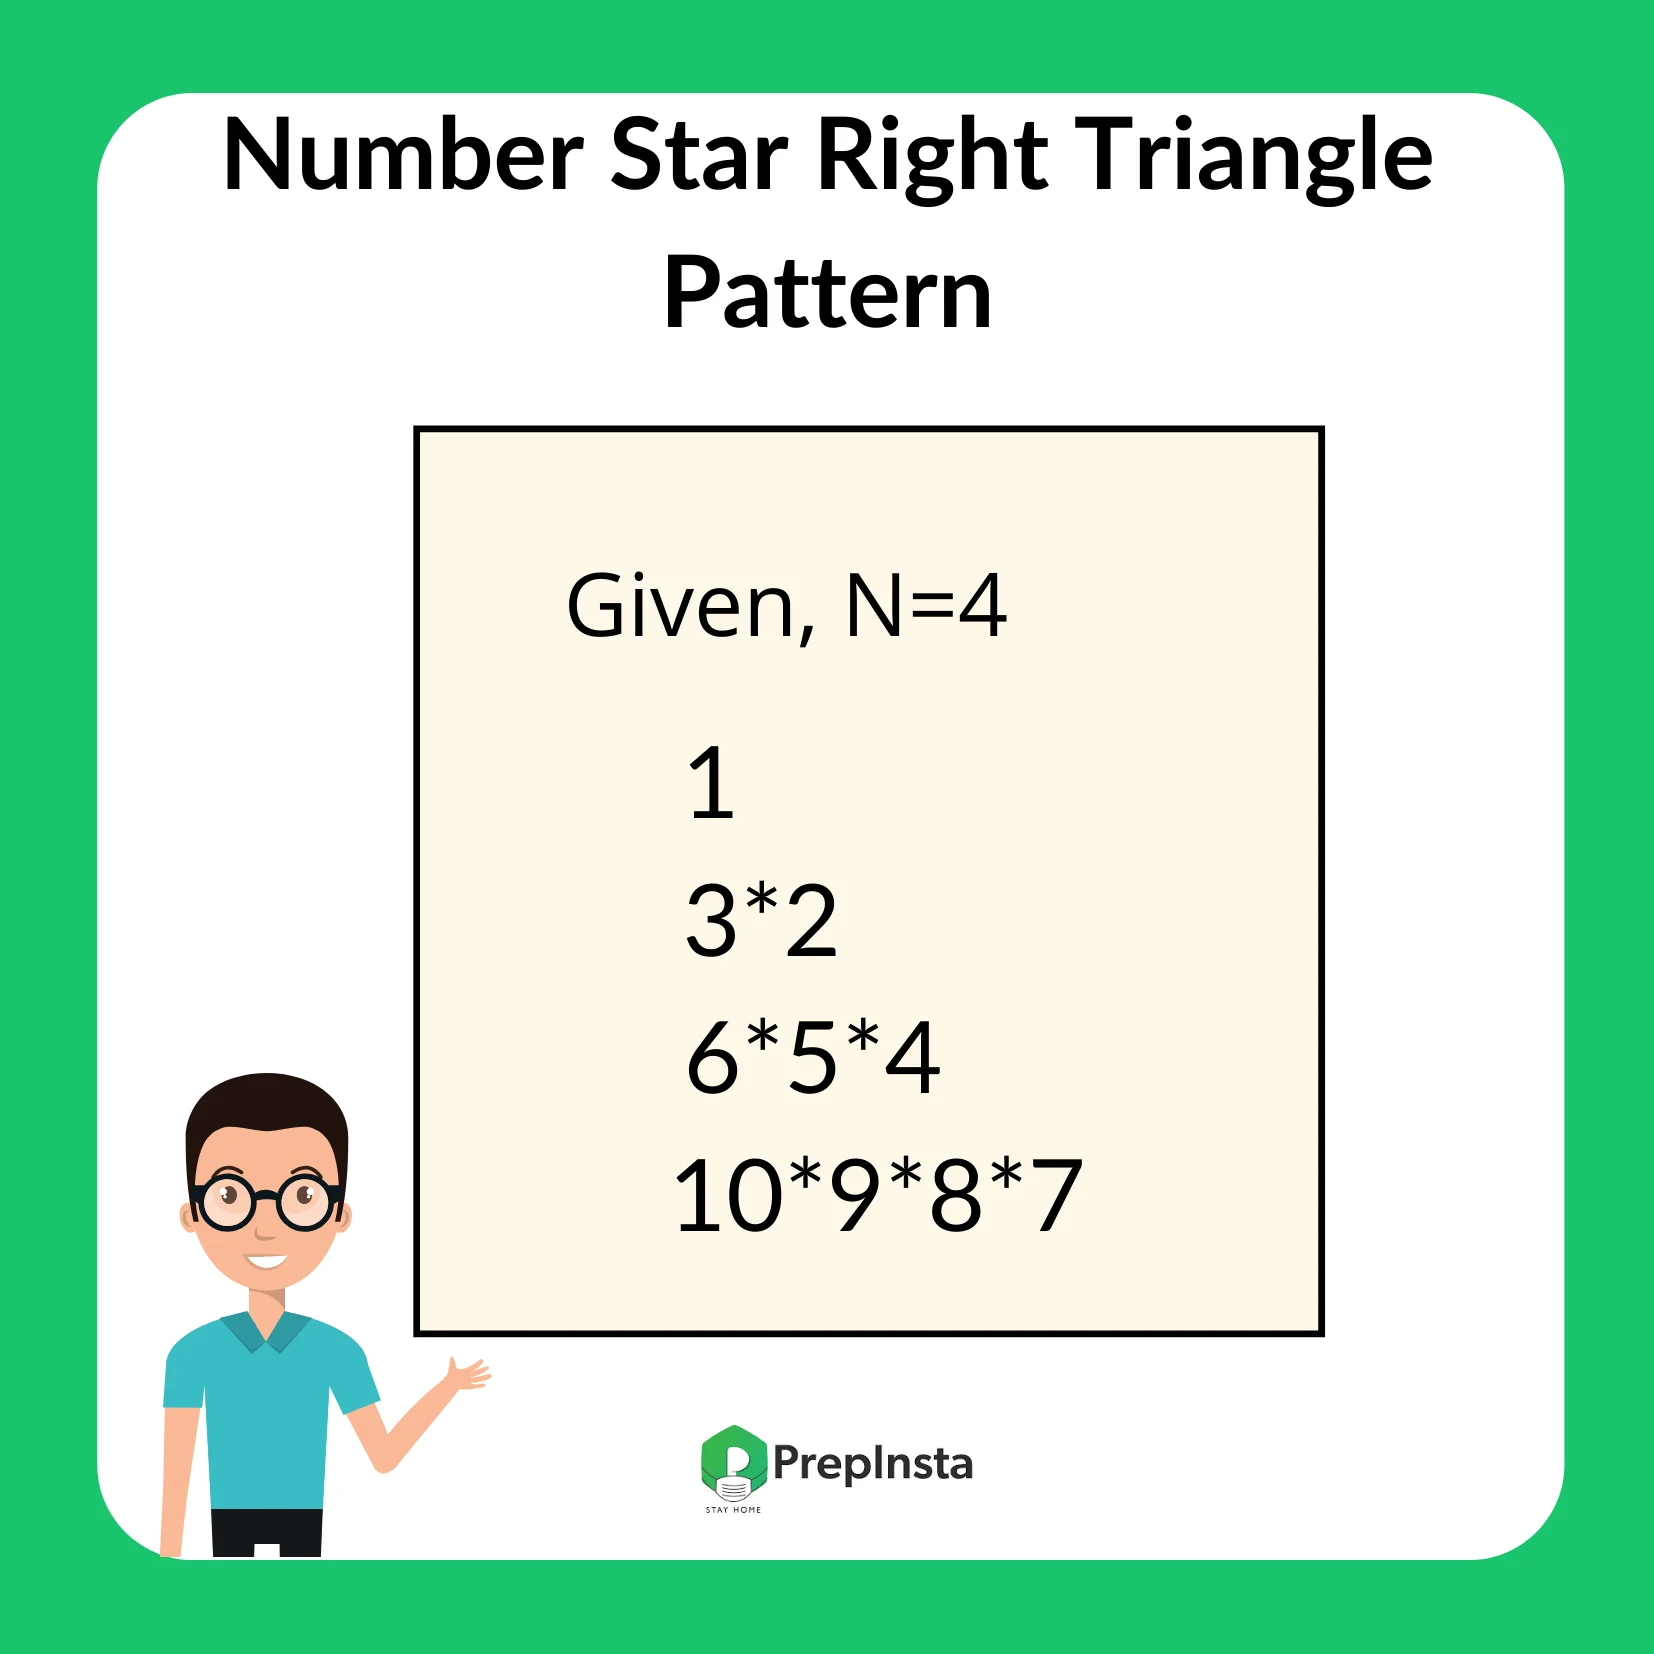 C Program to Print Number Star Right Triangle Pattern